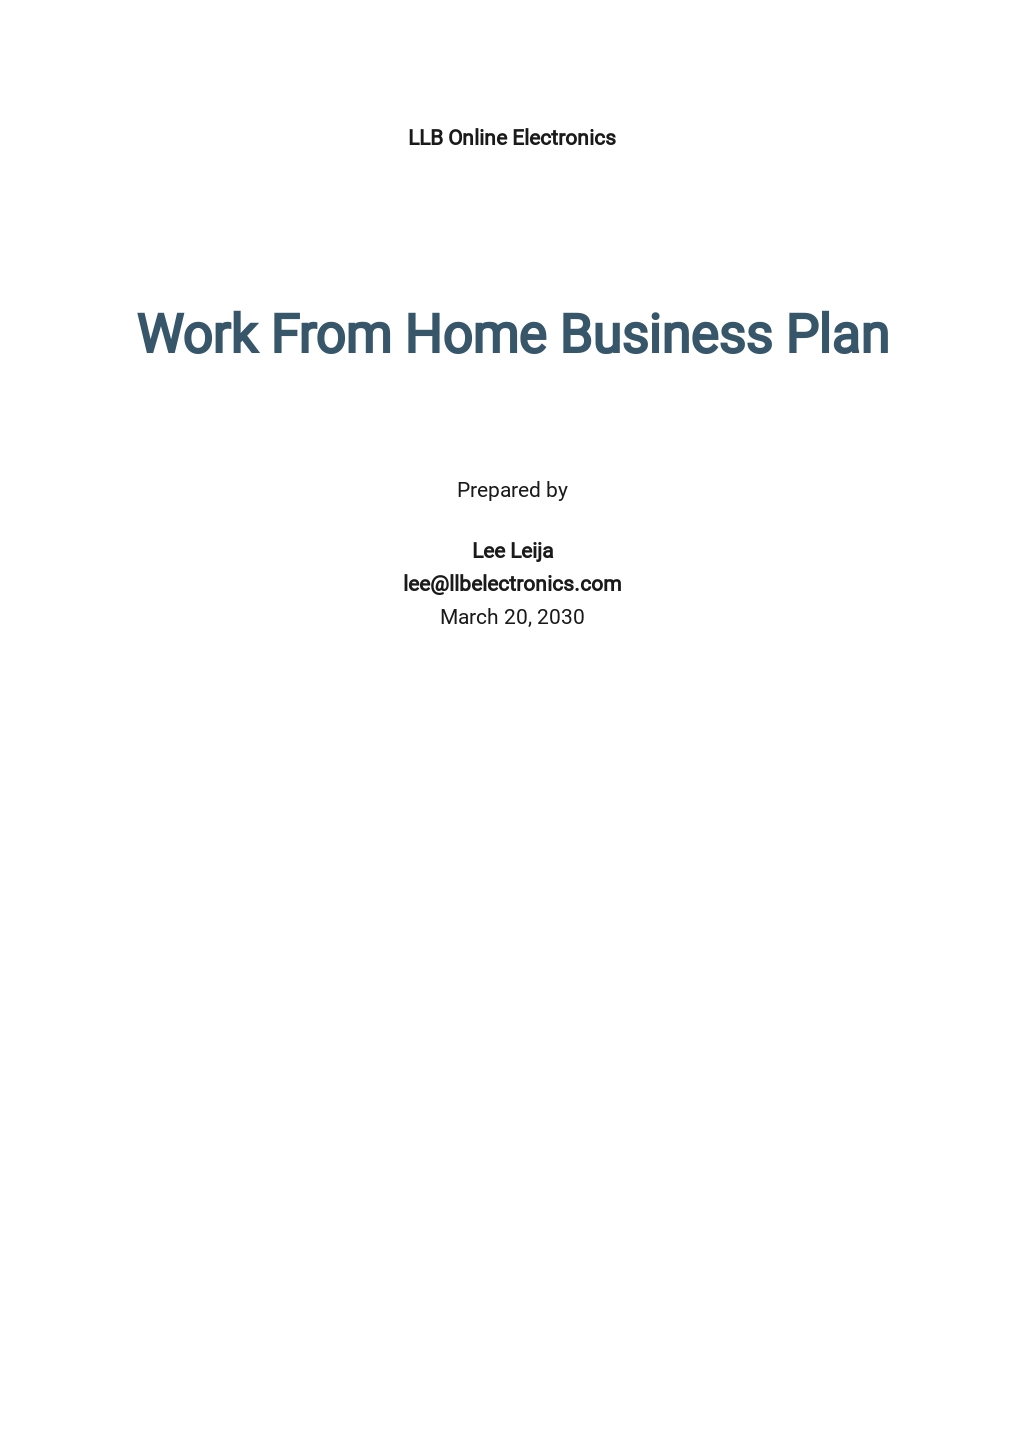 business plan for working from home